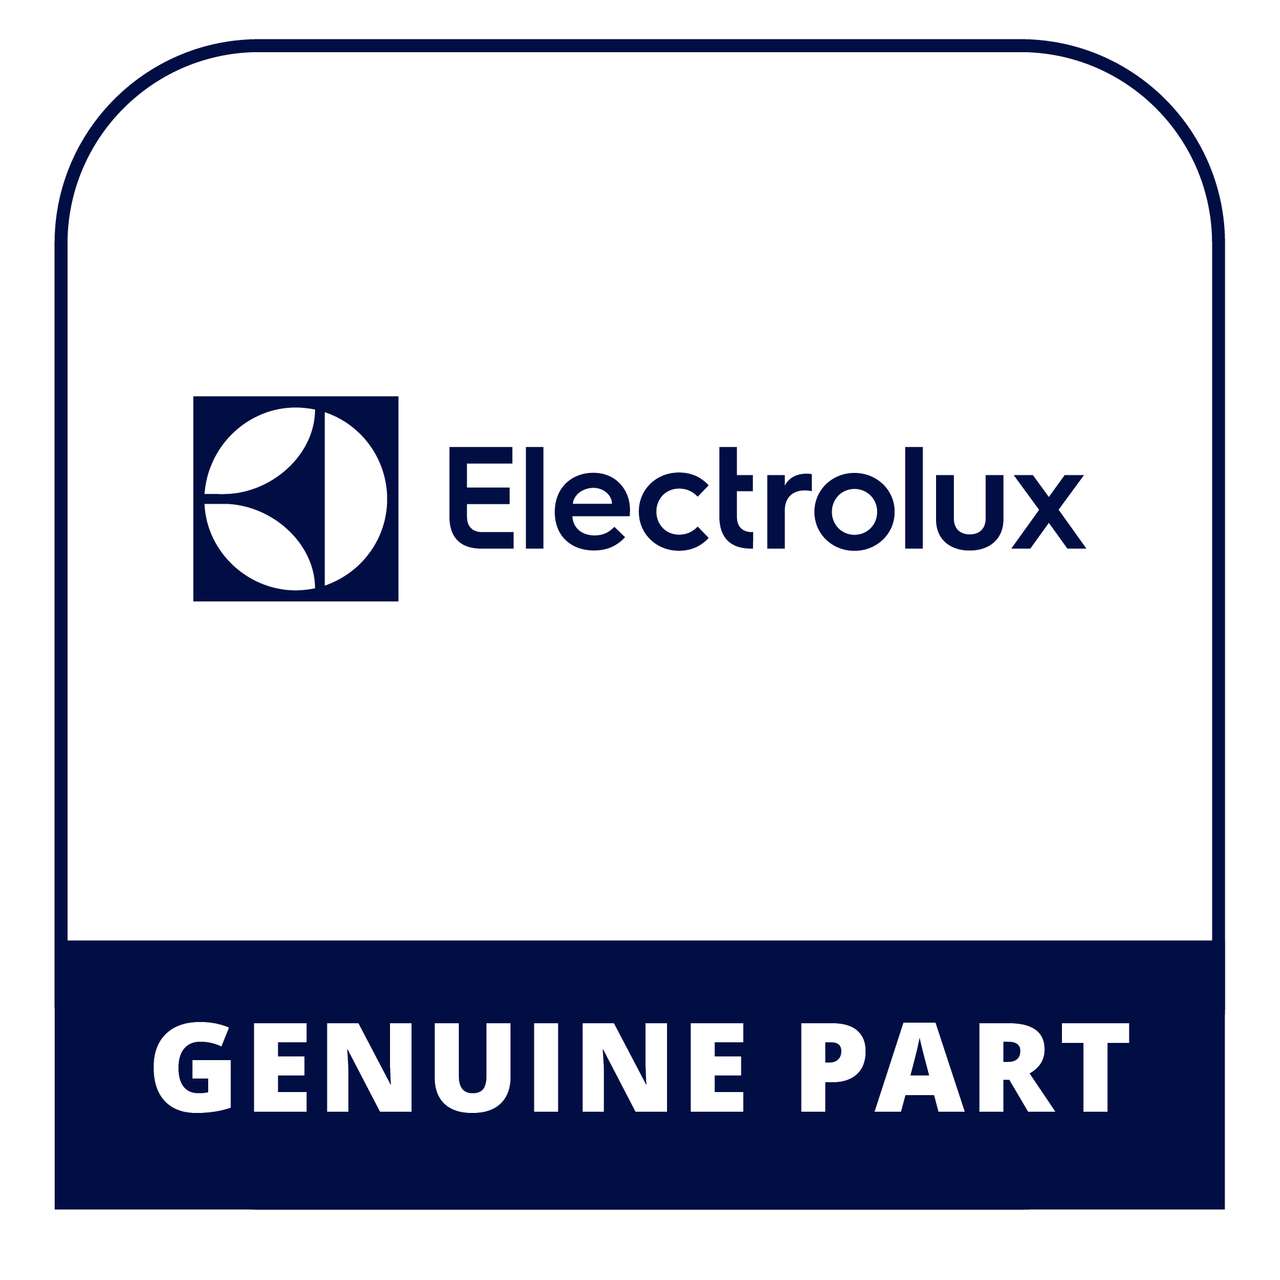 Frigidaire - Electrolux 318205831 Owners Manual - Genuine Electrolux Part